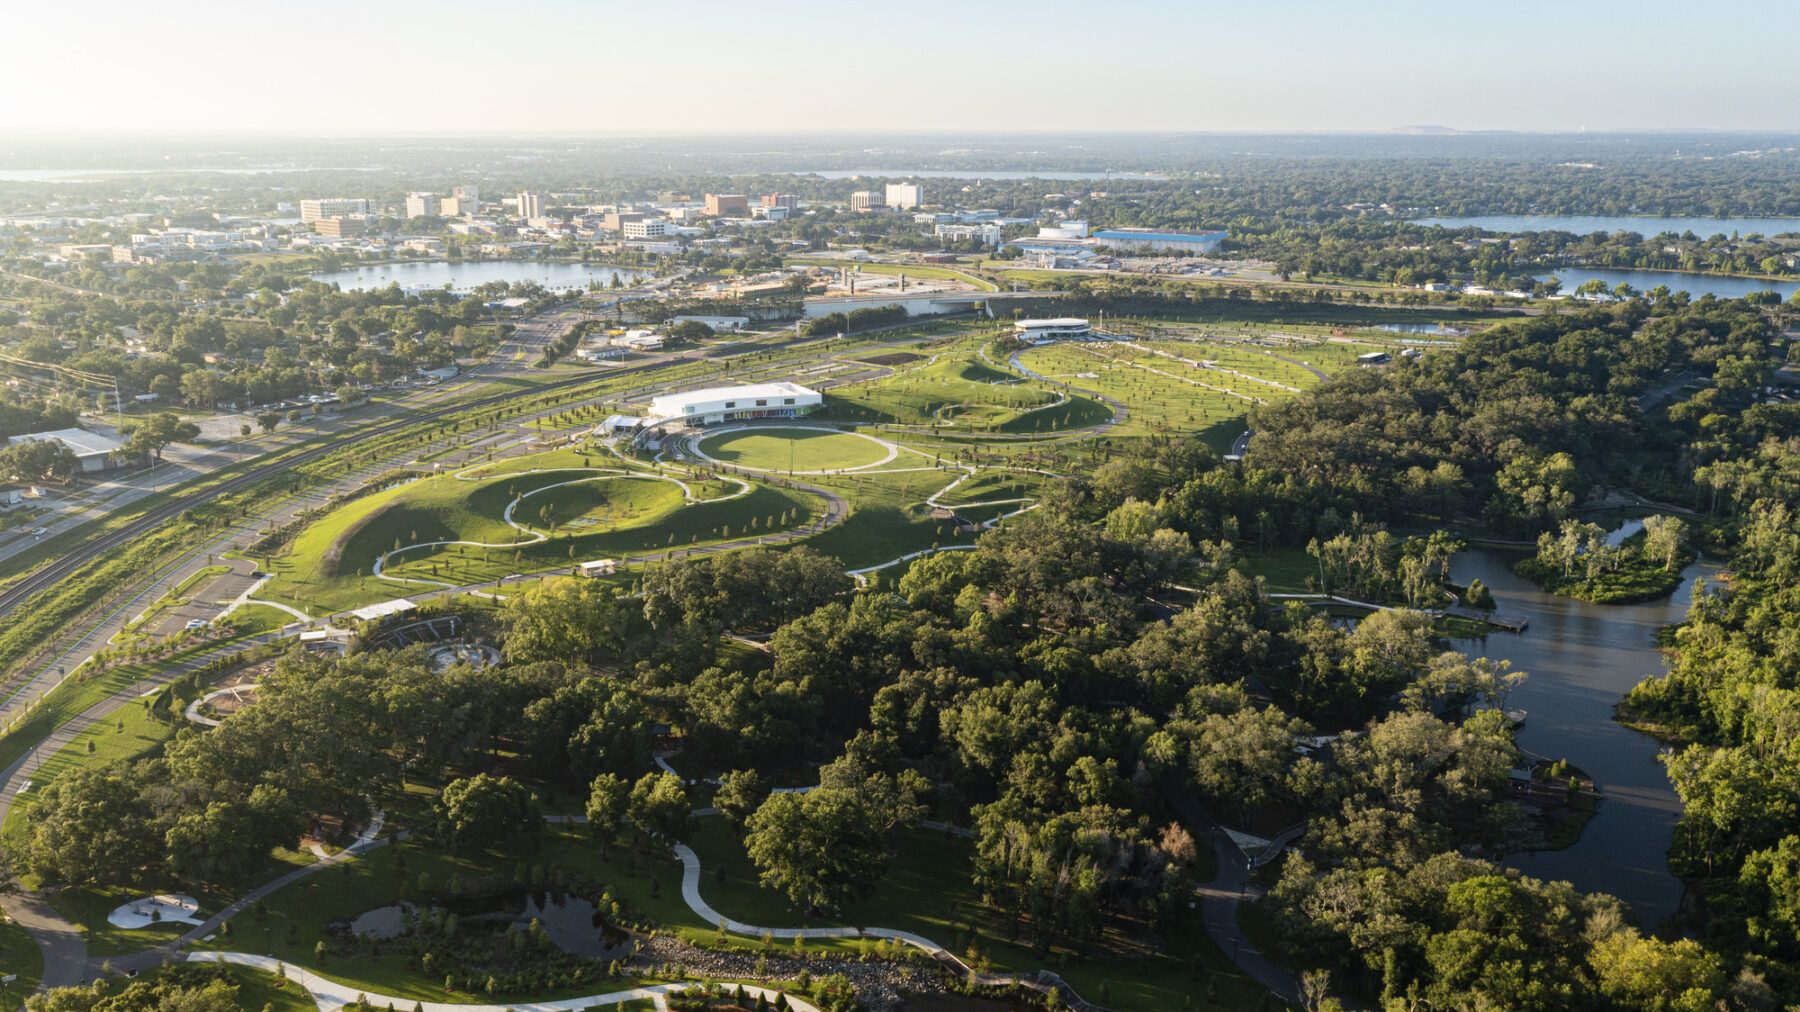 Aerial view of the park at dusk with a view of the city of Lakeland in the distance